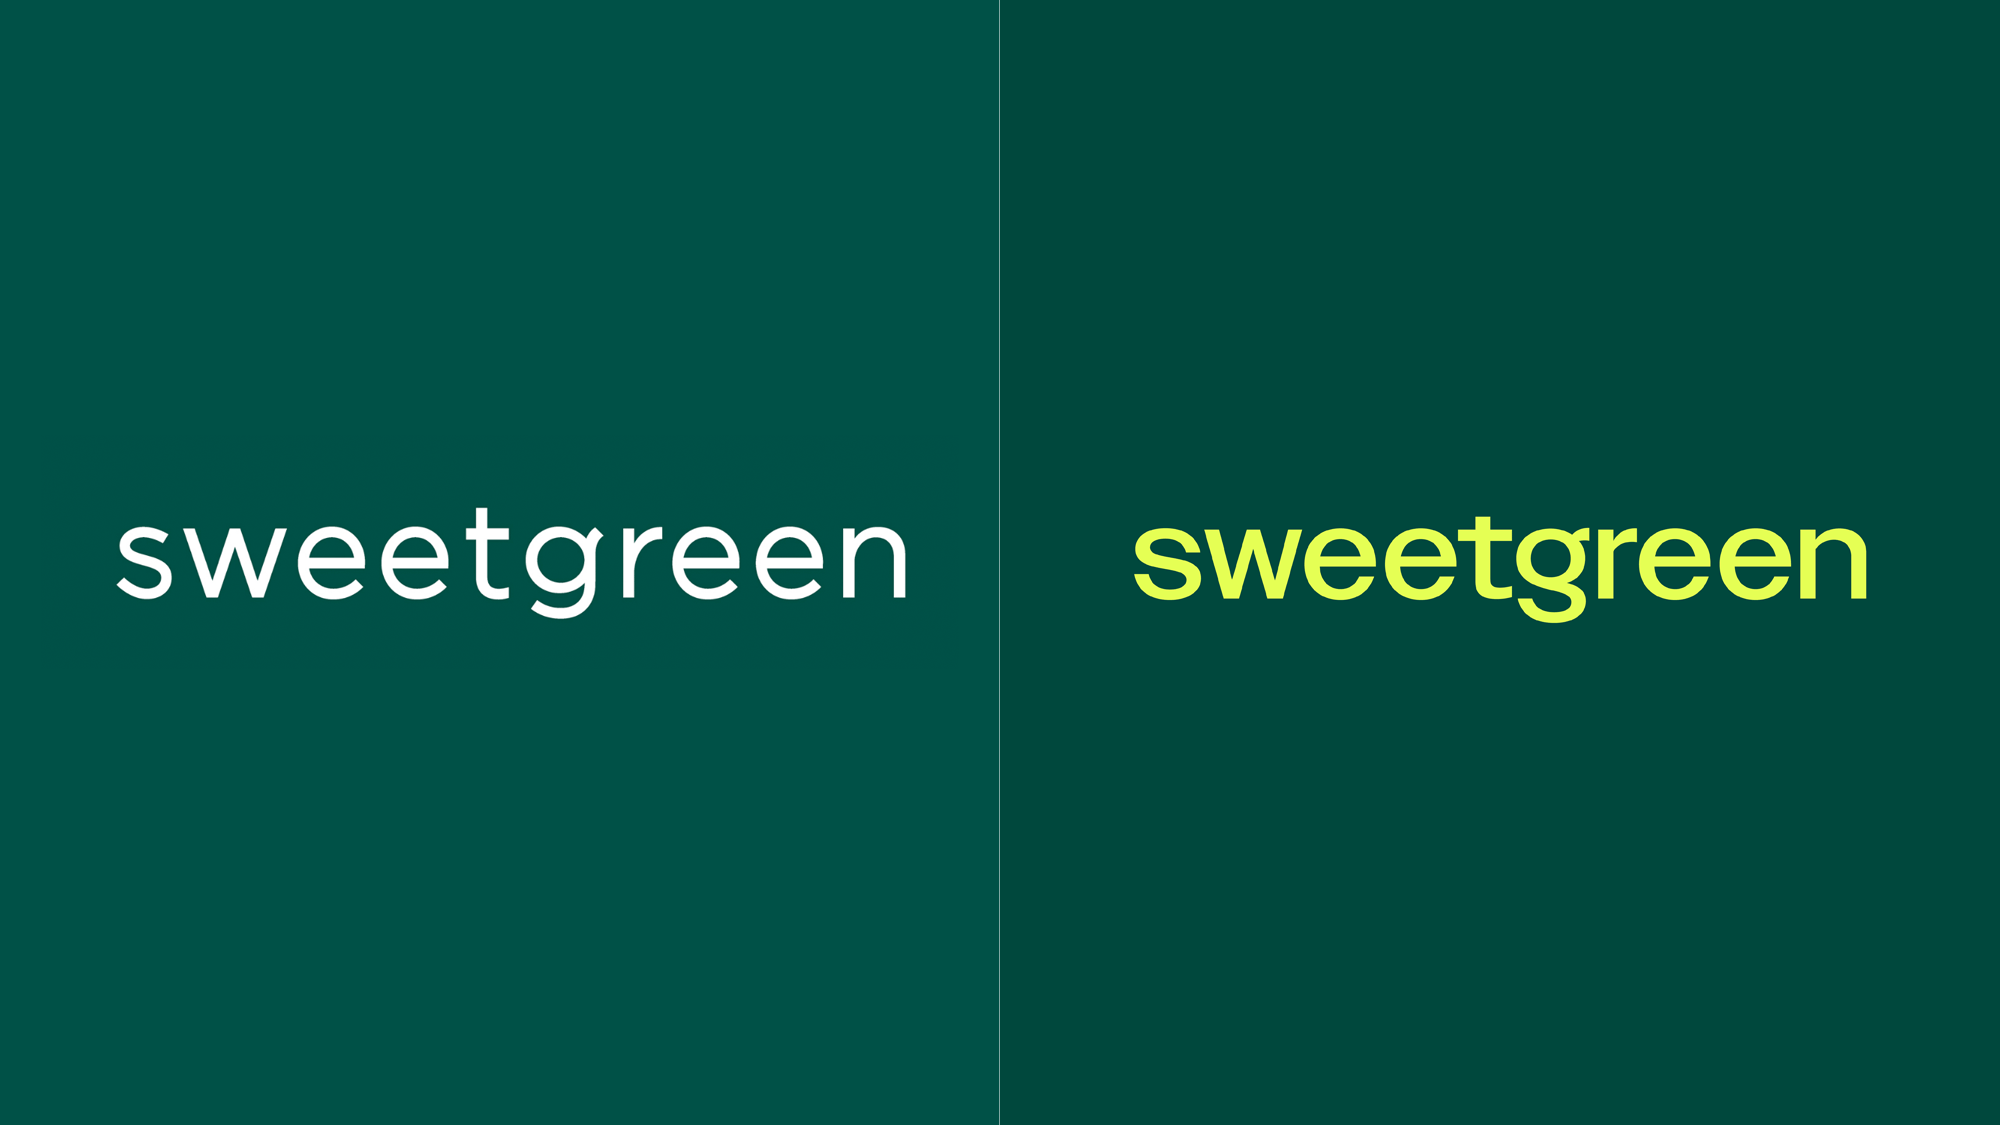 Sweetgreen by COLLINS and In-house